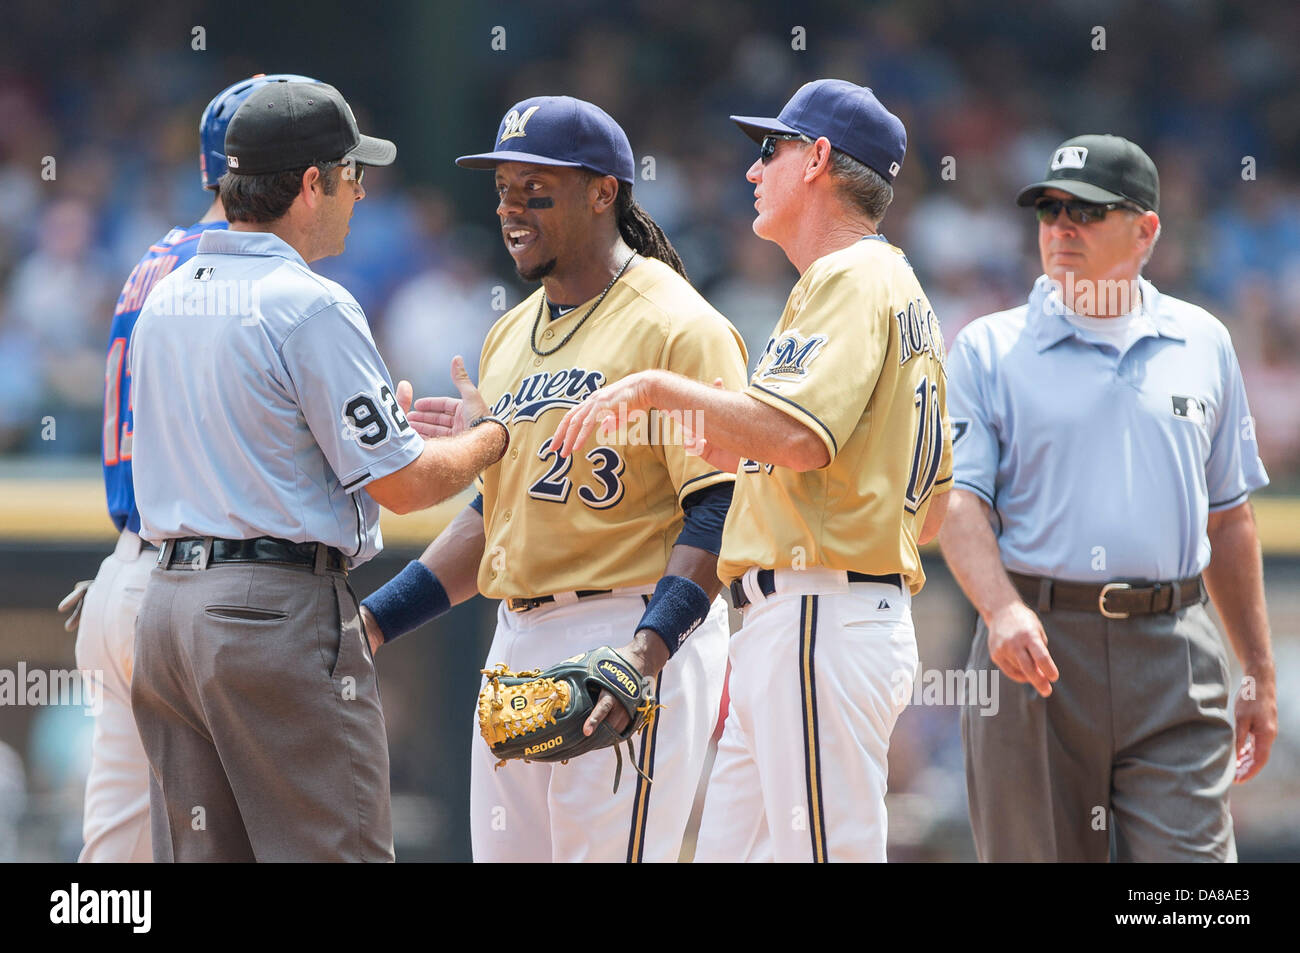 July 7, 2013 - Milwaukee, Wisconsin, United States of America - July 7, 2013: Milwaukee Brewers second baseman Rickie Weeks #23 along with Milwaukee Brewers manager Ron Roenicke #10 discusses the call with umpire John Hirschbeck during the Major League Baseball game between the Milwaukee Brewers and the New York Mets at Miller Park in Milwaukee, WI. Mets lead the Brewers 2-1 in the 8th inning. John Fisher/CSM. Stock Photo